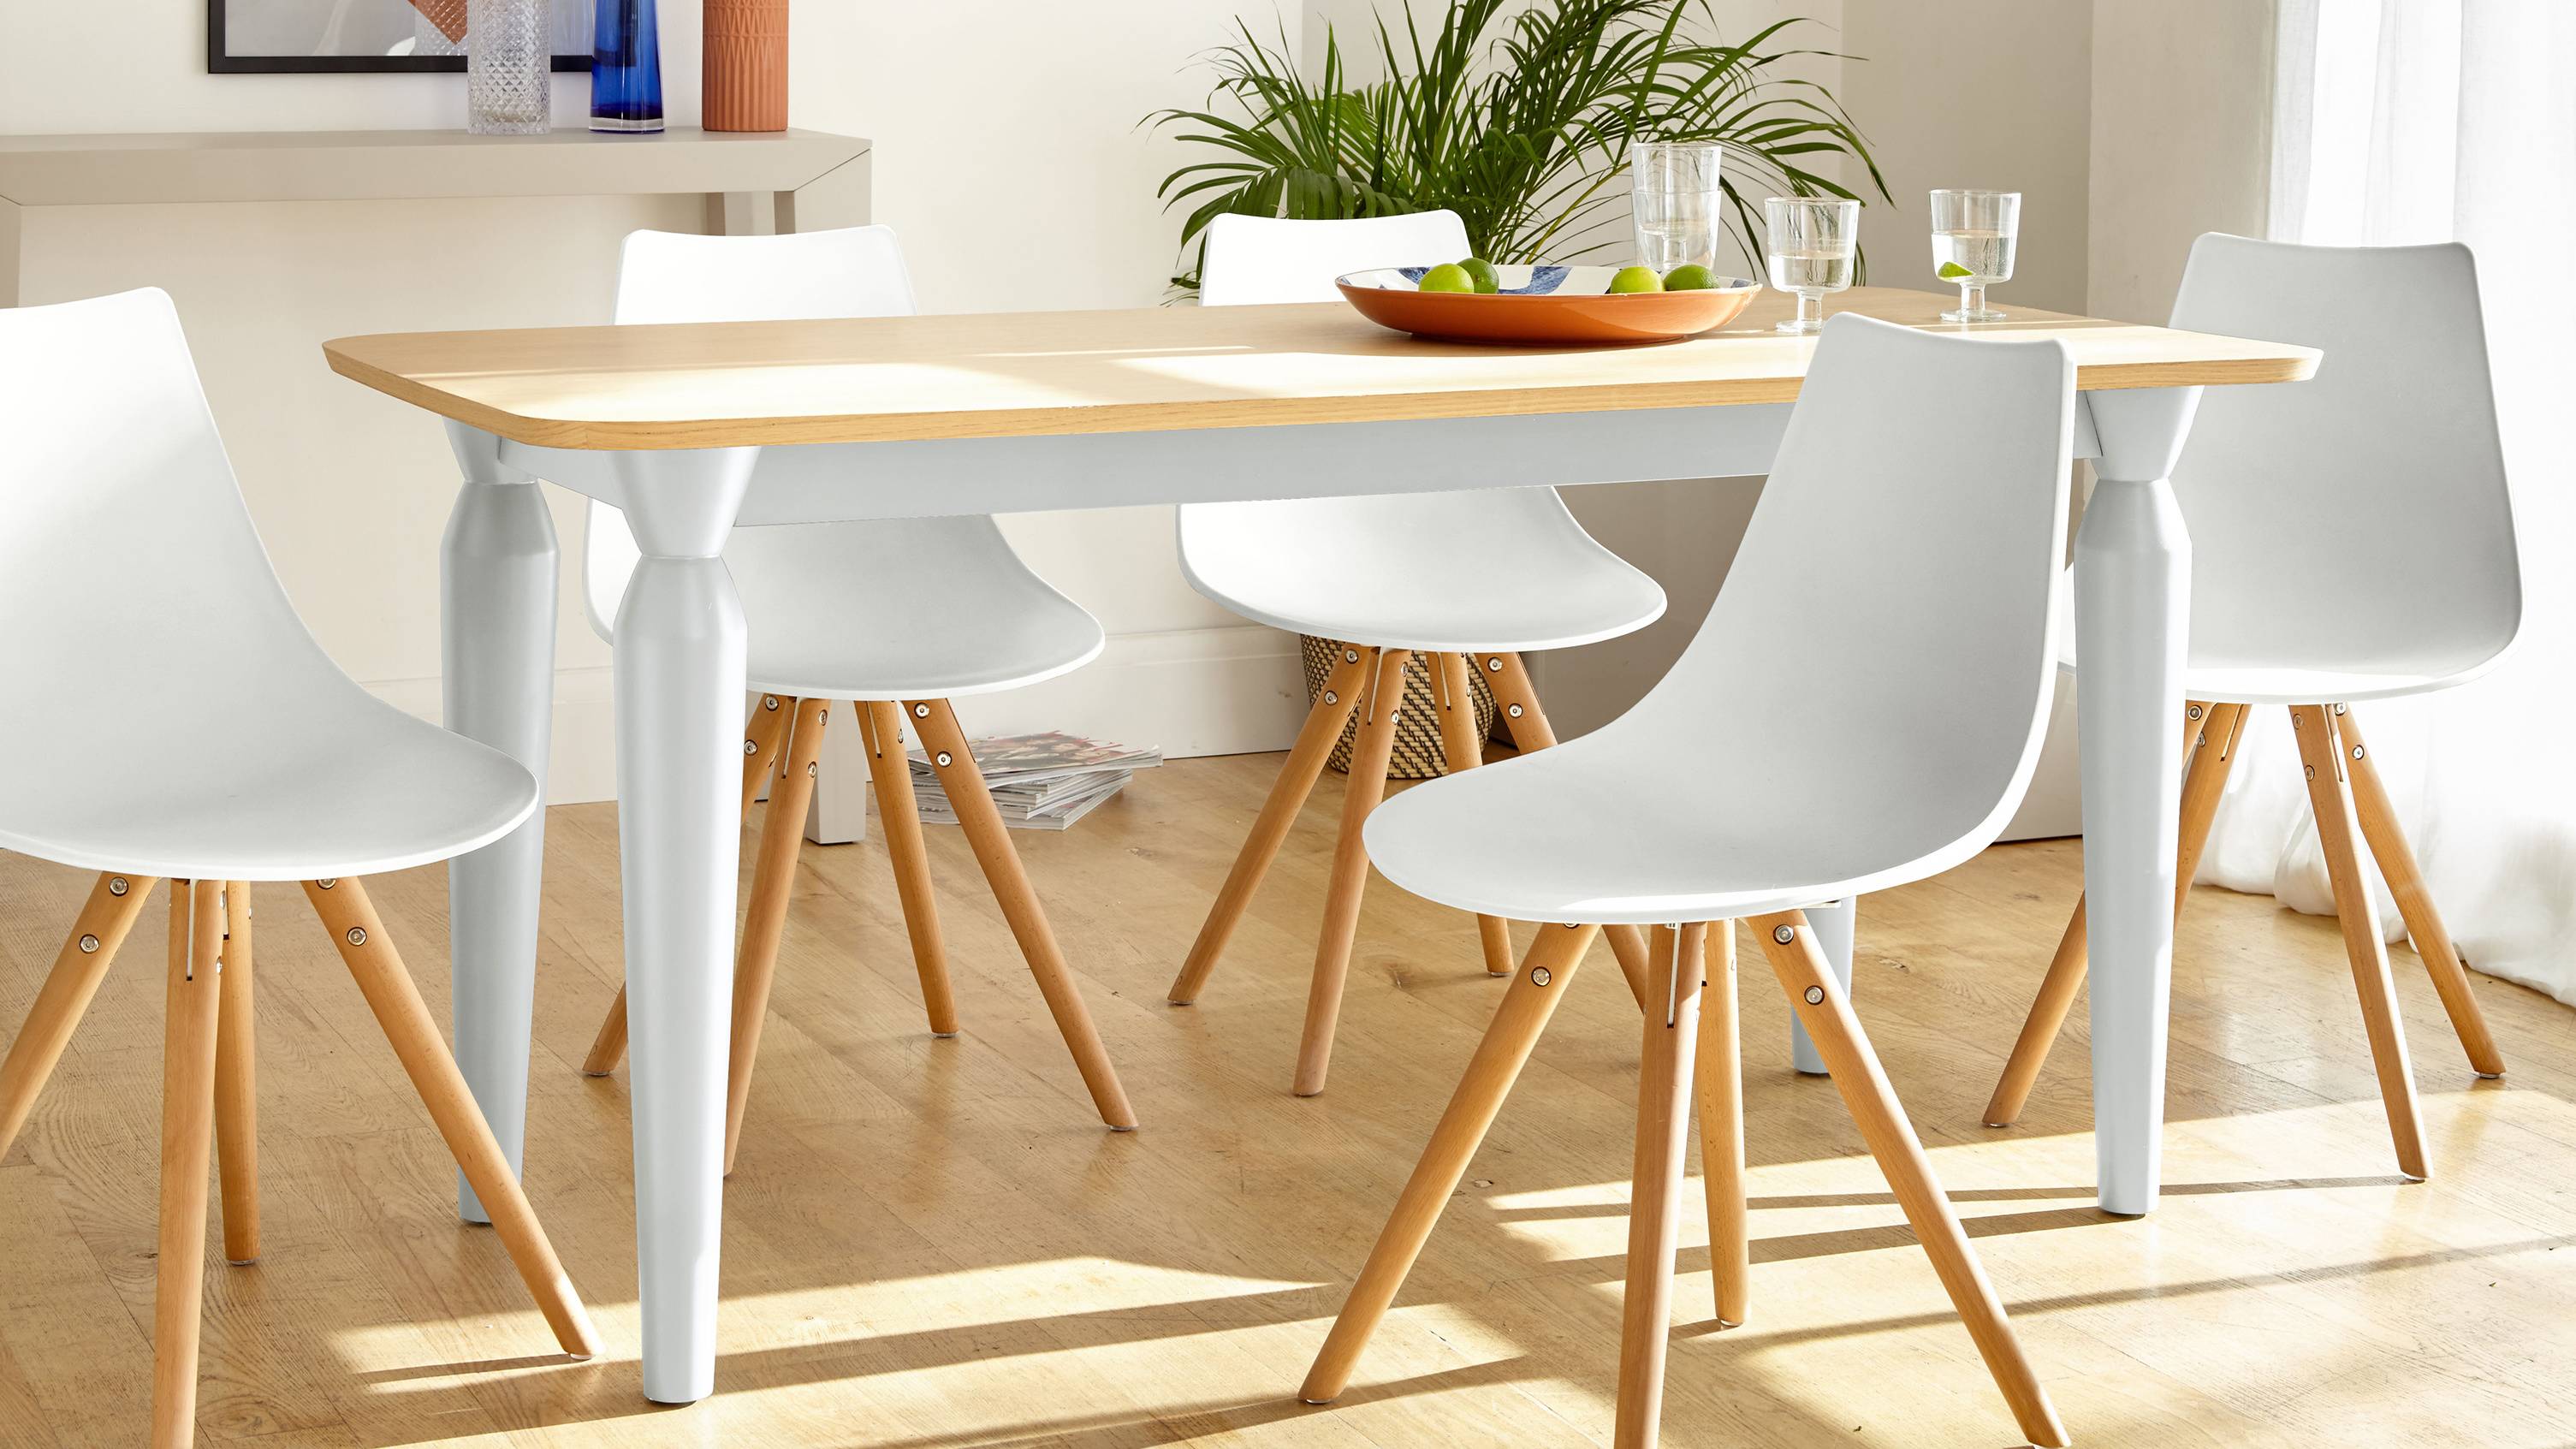 Matt white and wood modern country table